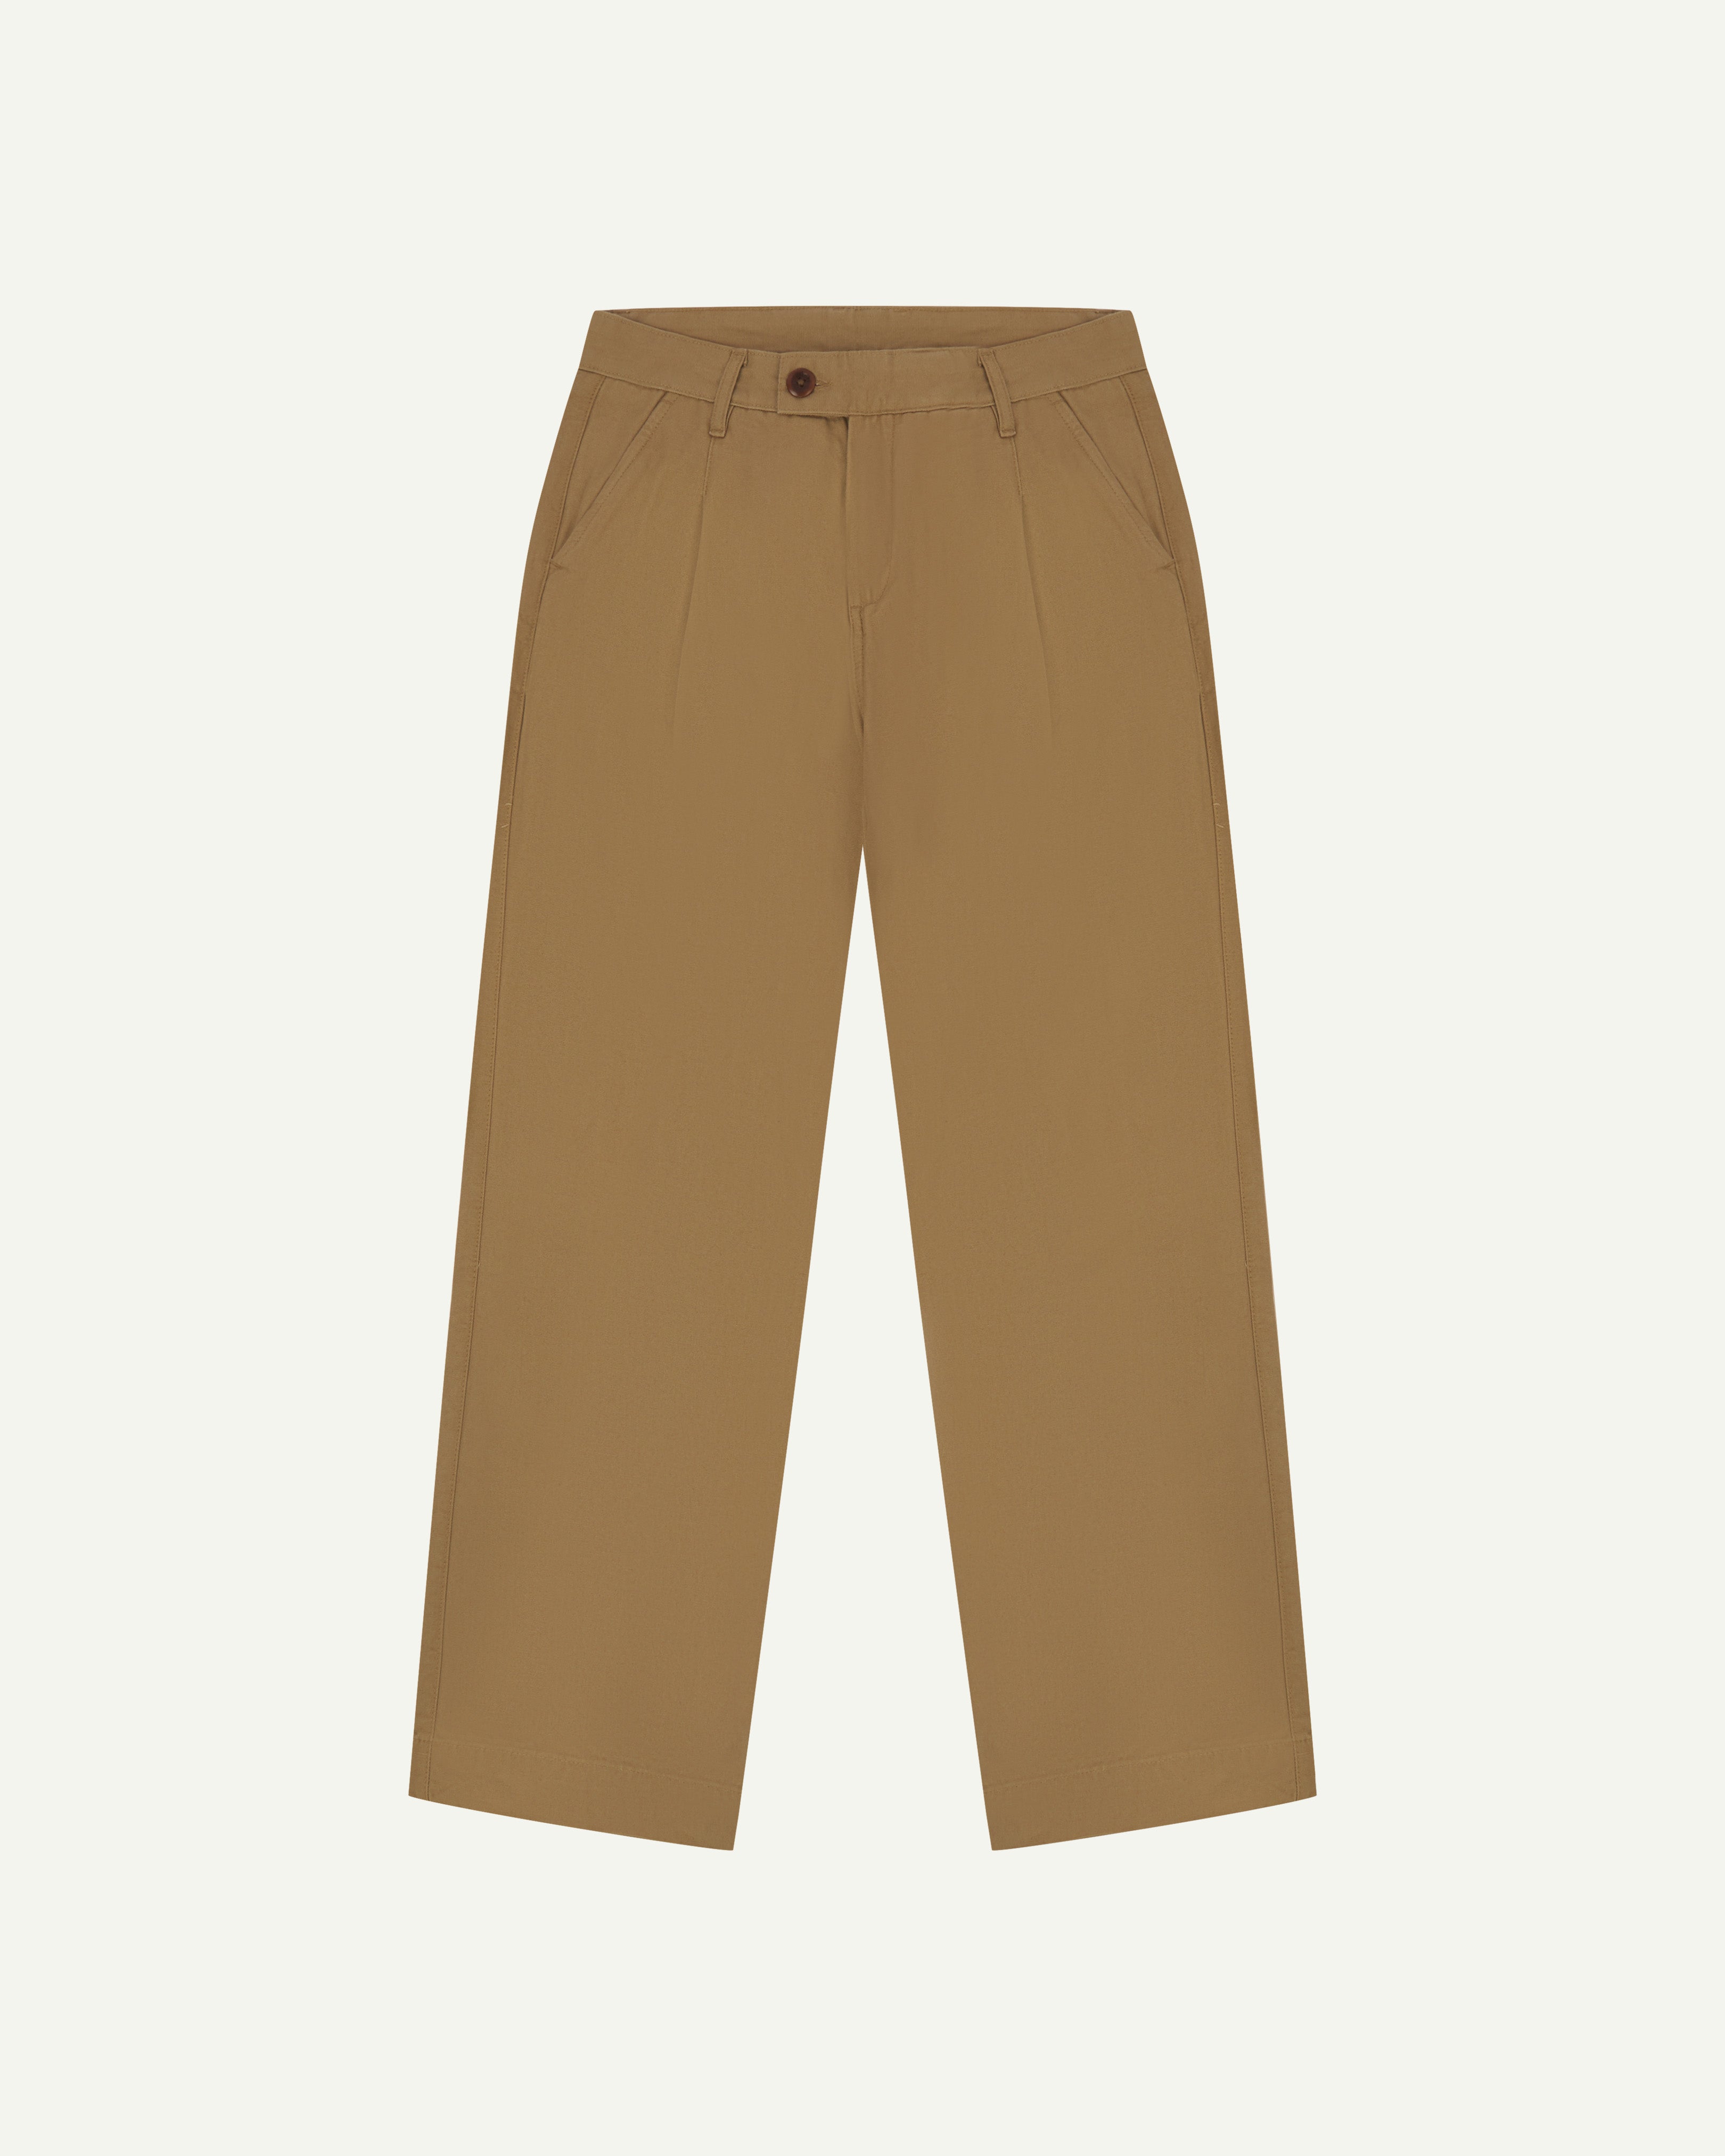 Front flat shot of #5018 Uskees men's organic cotton boat trousers in khaki showing wide leg style